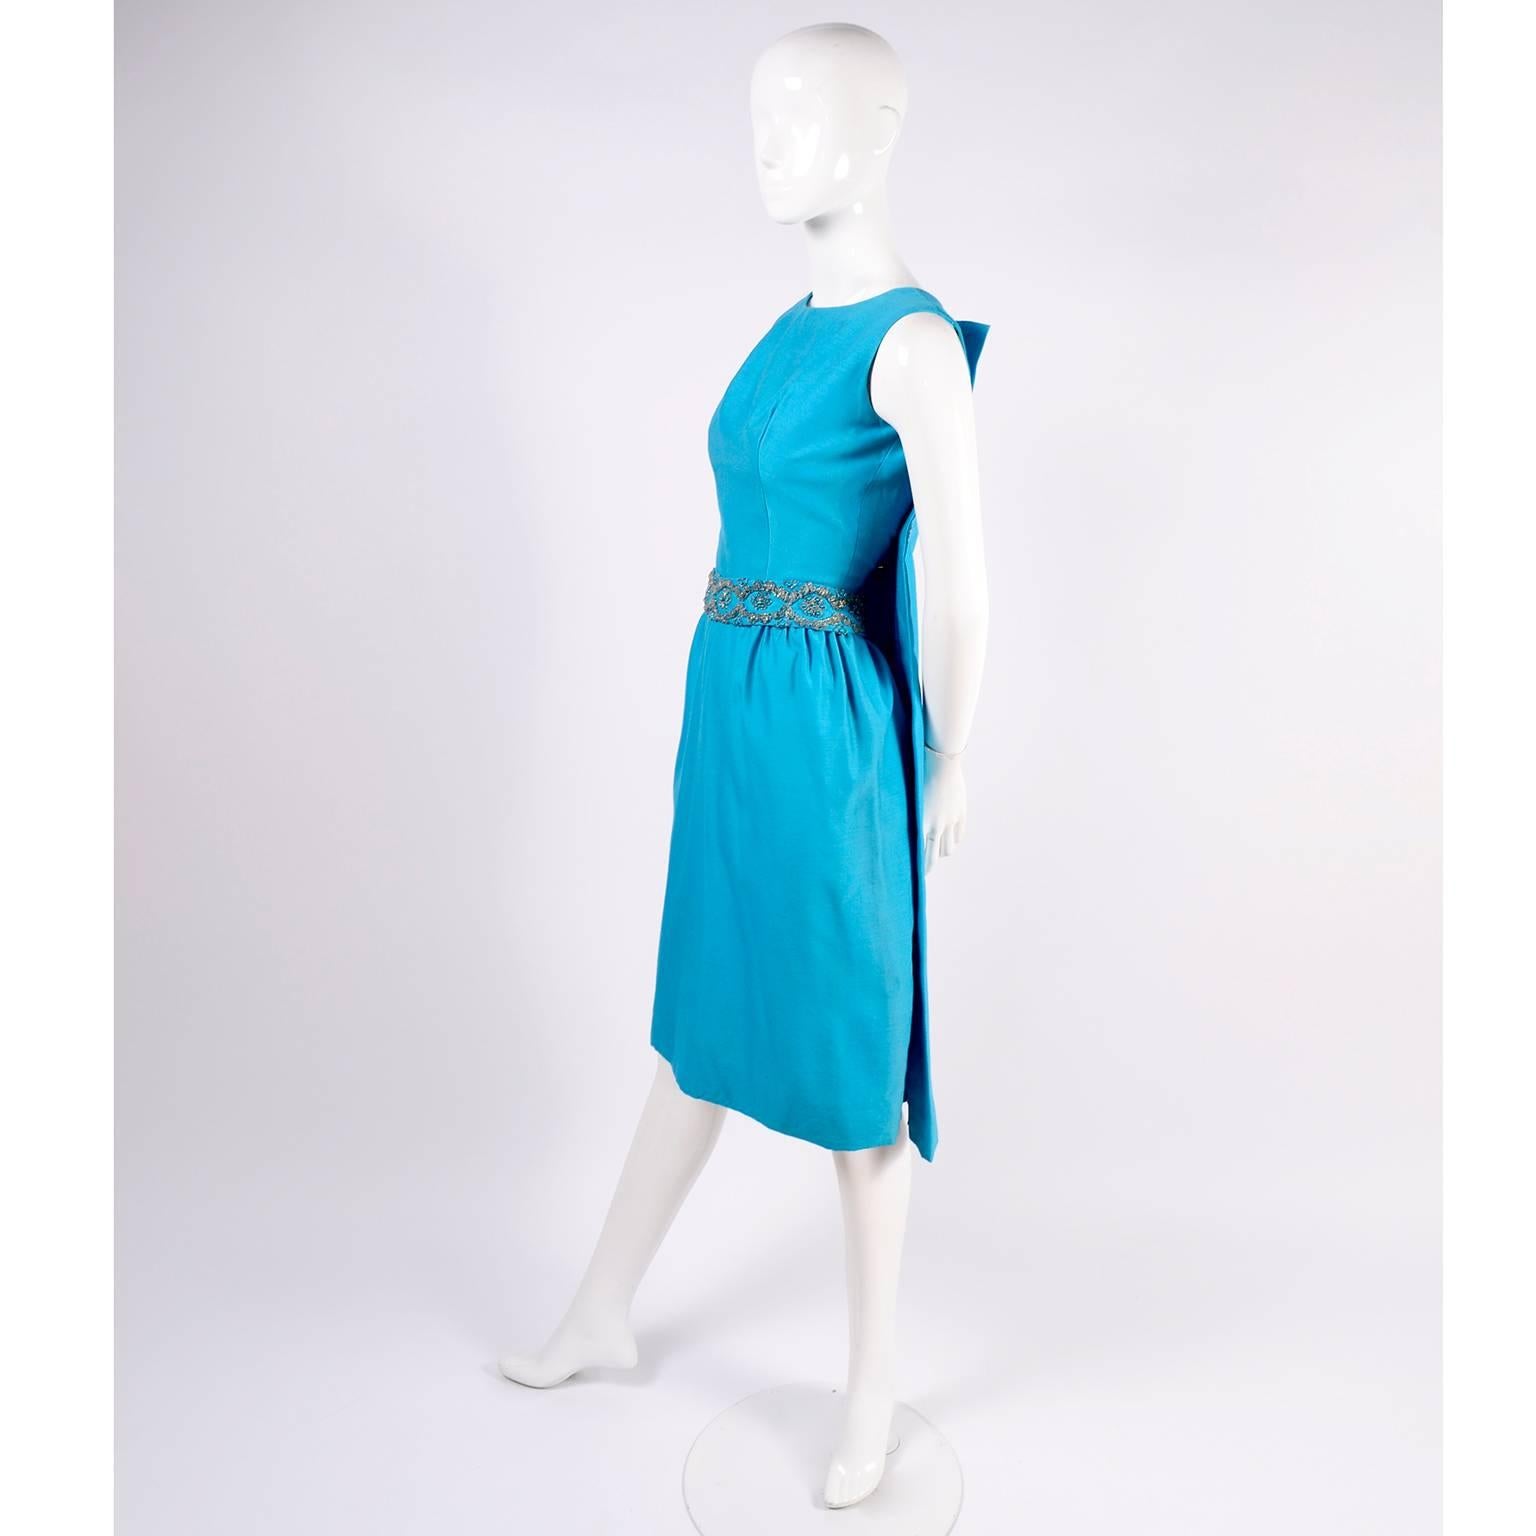 This is simply an incredible Suzy Perette late 1950's vintage dress in blue silk with a beaded belt, beaded buttons, and a removable back panel or cape that can be taken off to reveal a beautiful open back!  This dress is in excellent condition,